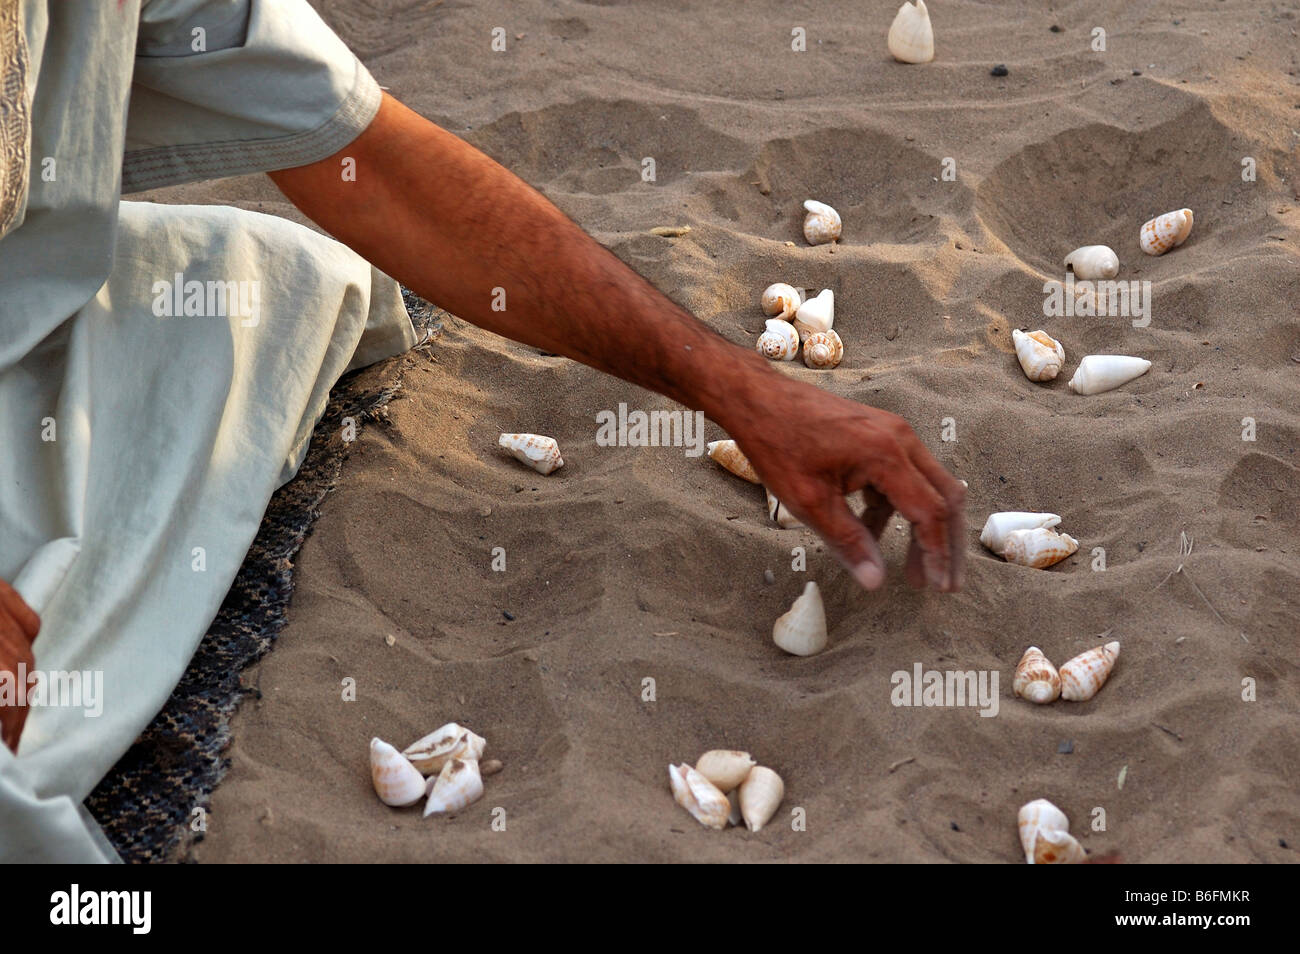 Man playing Shell Hawalis, the Omanian version of Mancala, Sultanate of Oman, Middle East Stock Photo